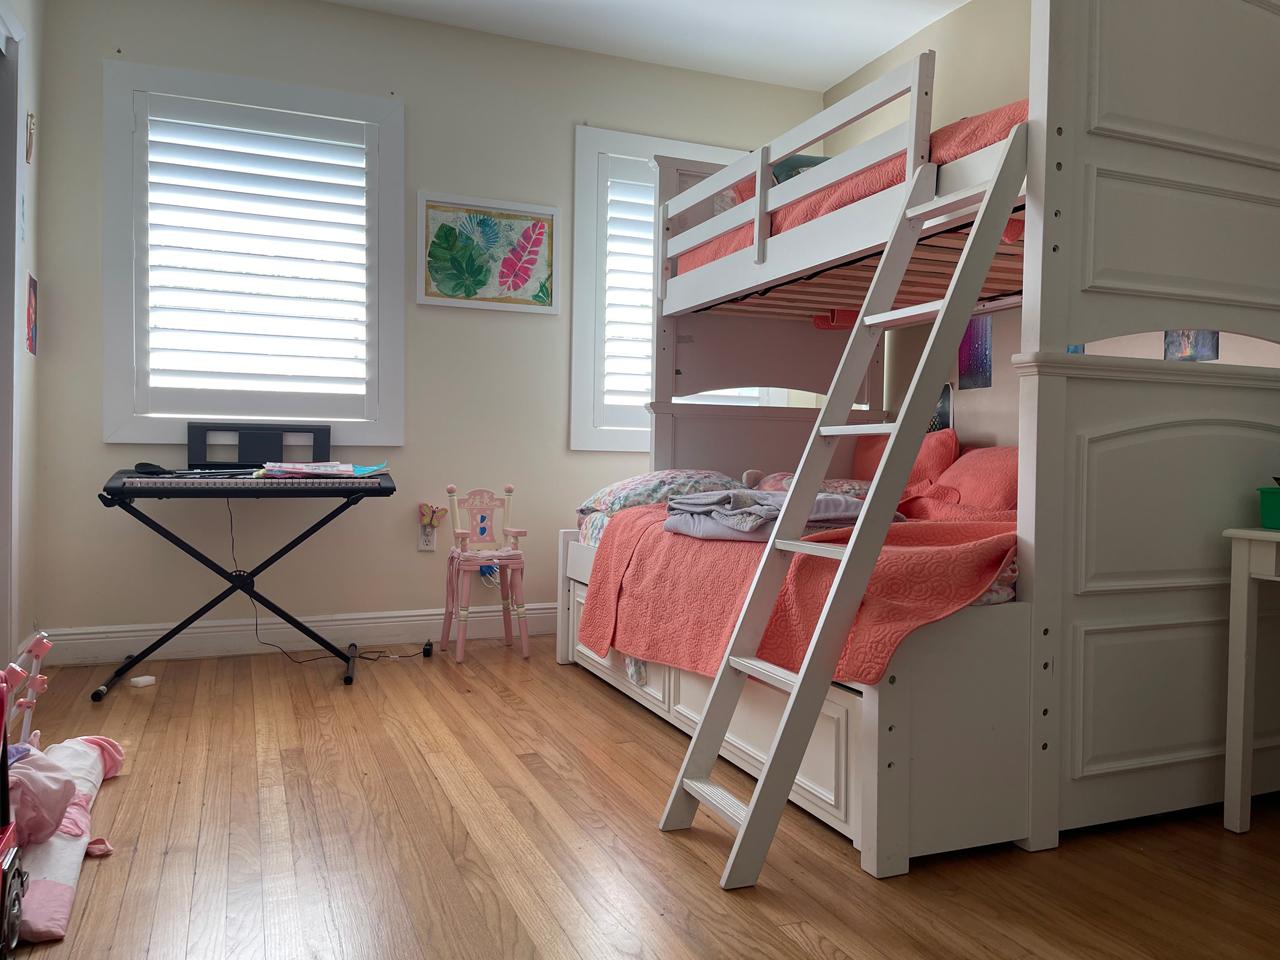 Child's room with interior shutters